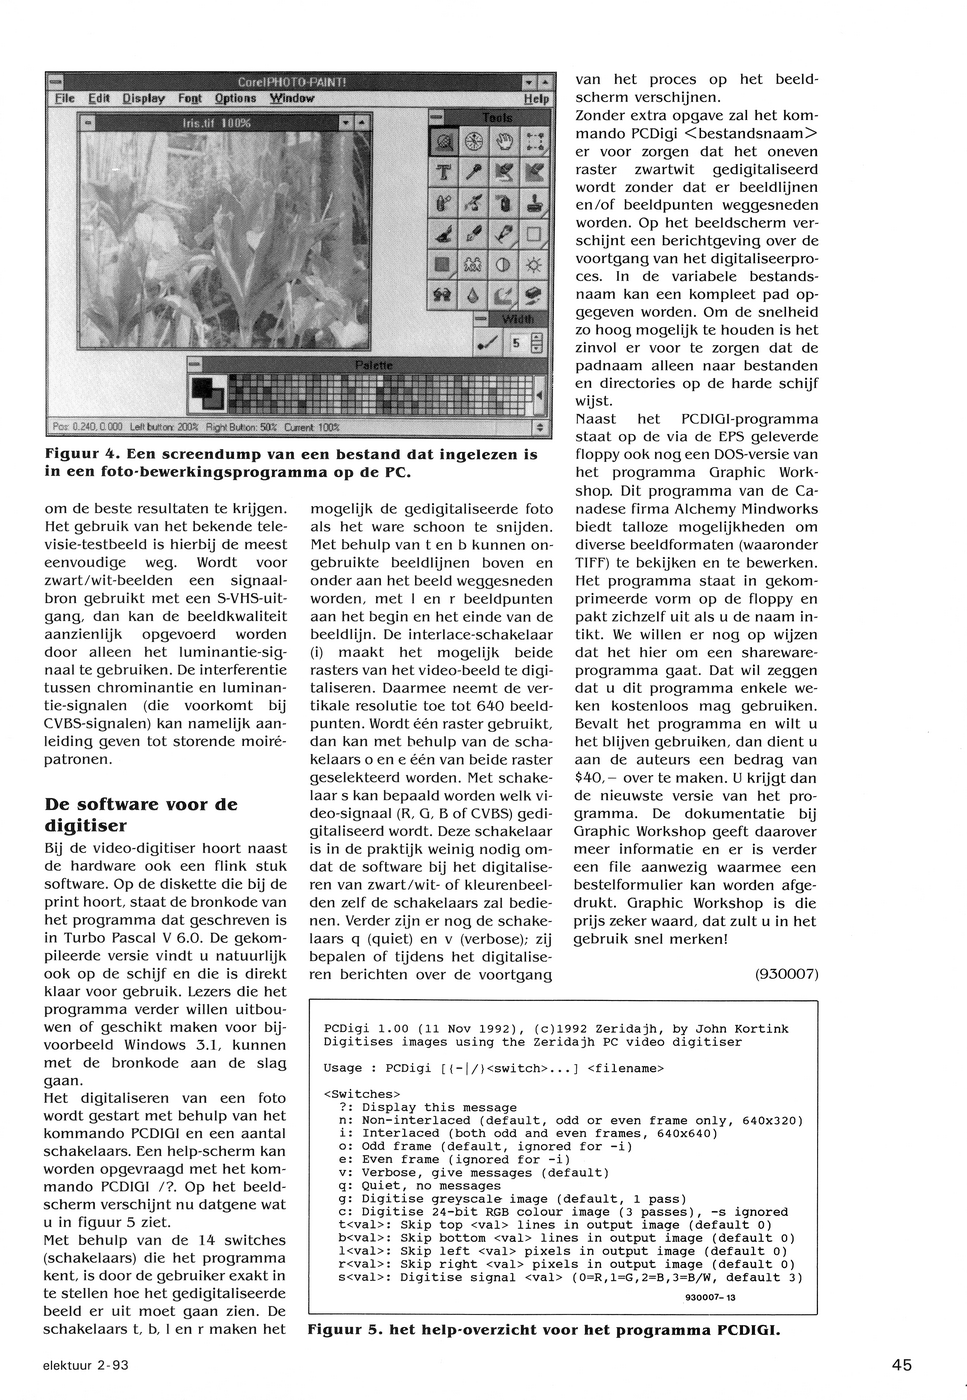 Article page 6/6 (click for magazine front)